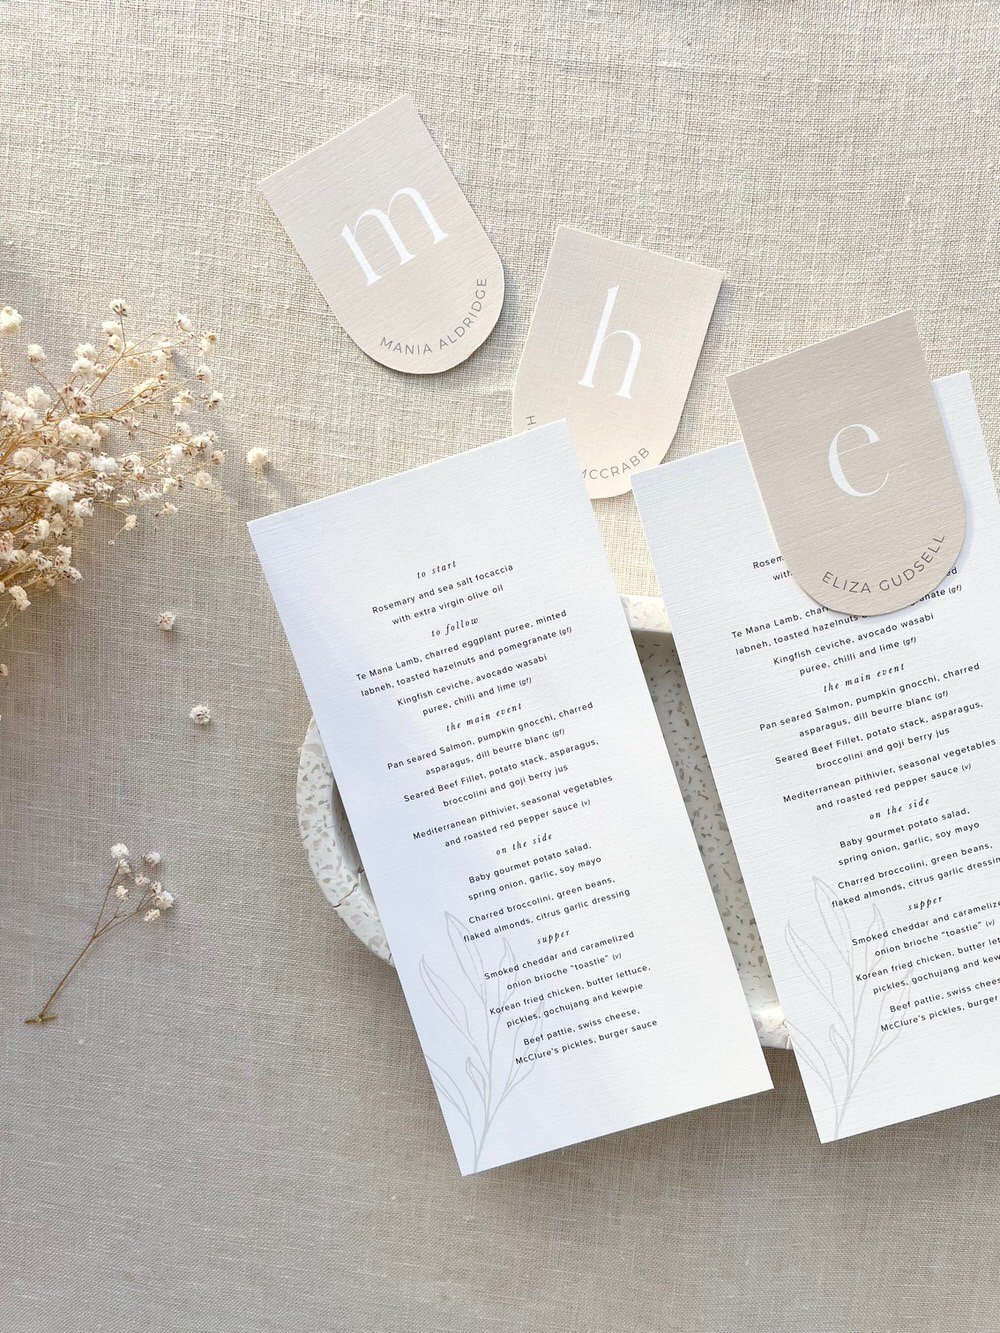 Just My Type Wedding Invitation Stationery NZ Wedding Menu Place Name Table Number9920.jpg